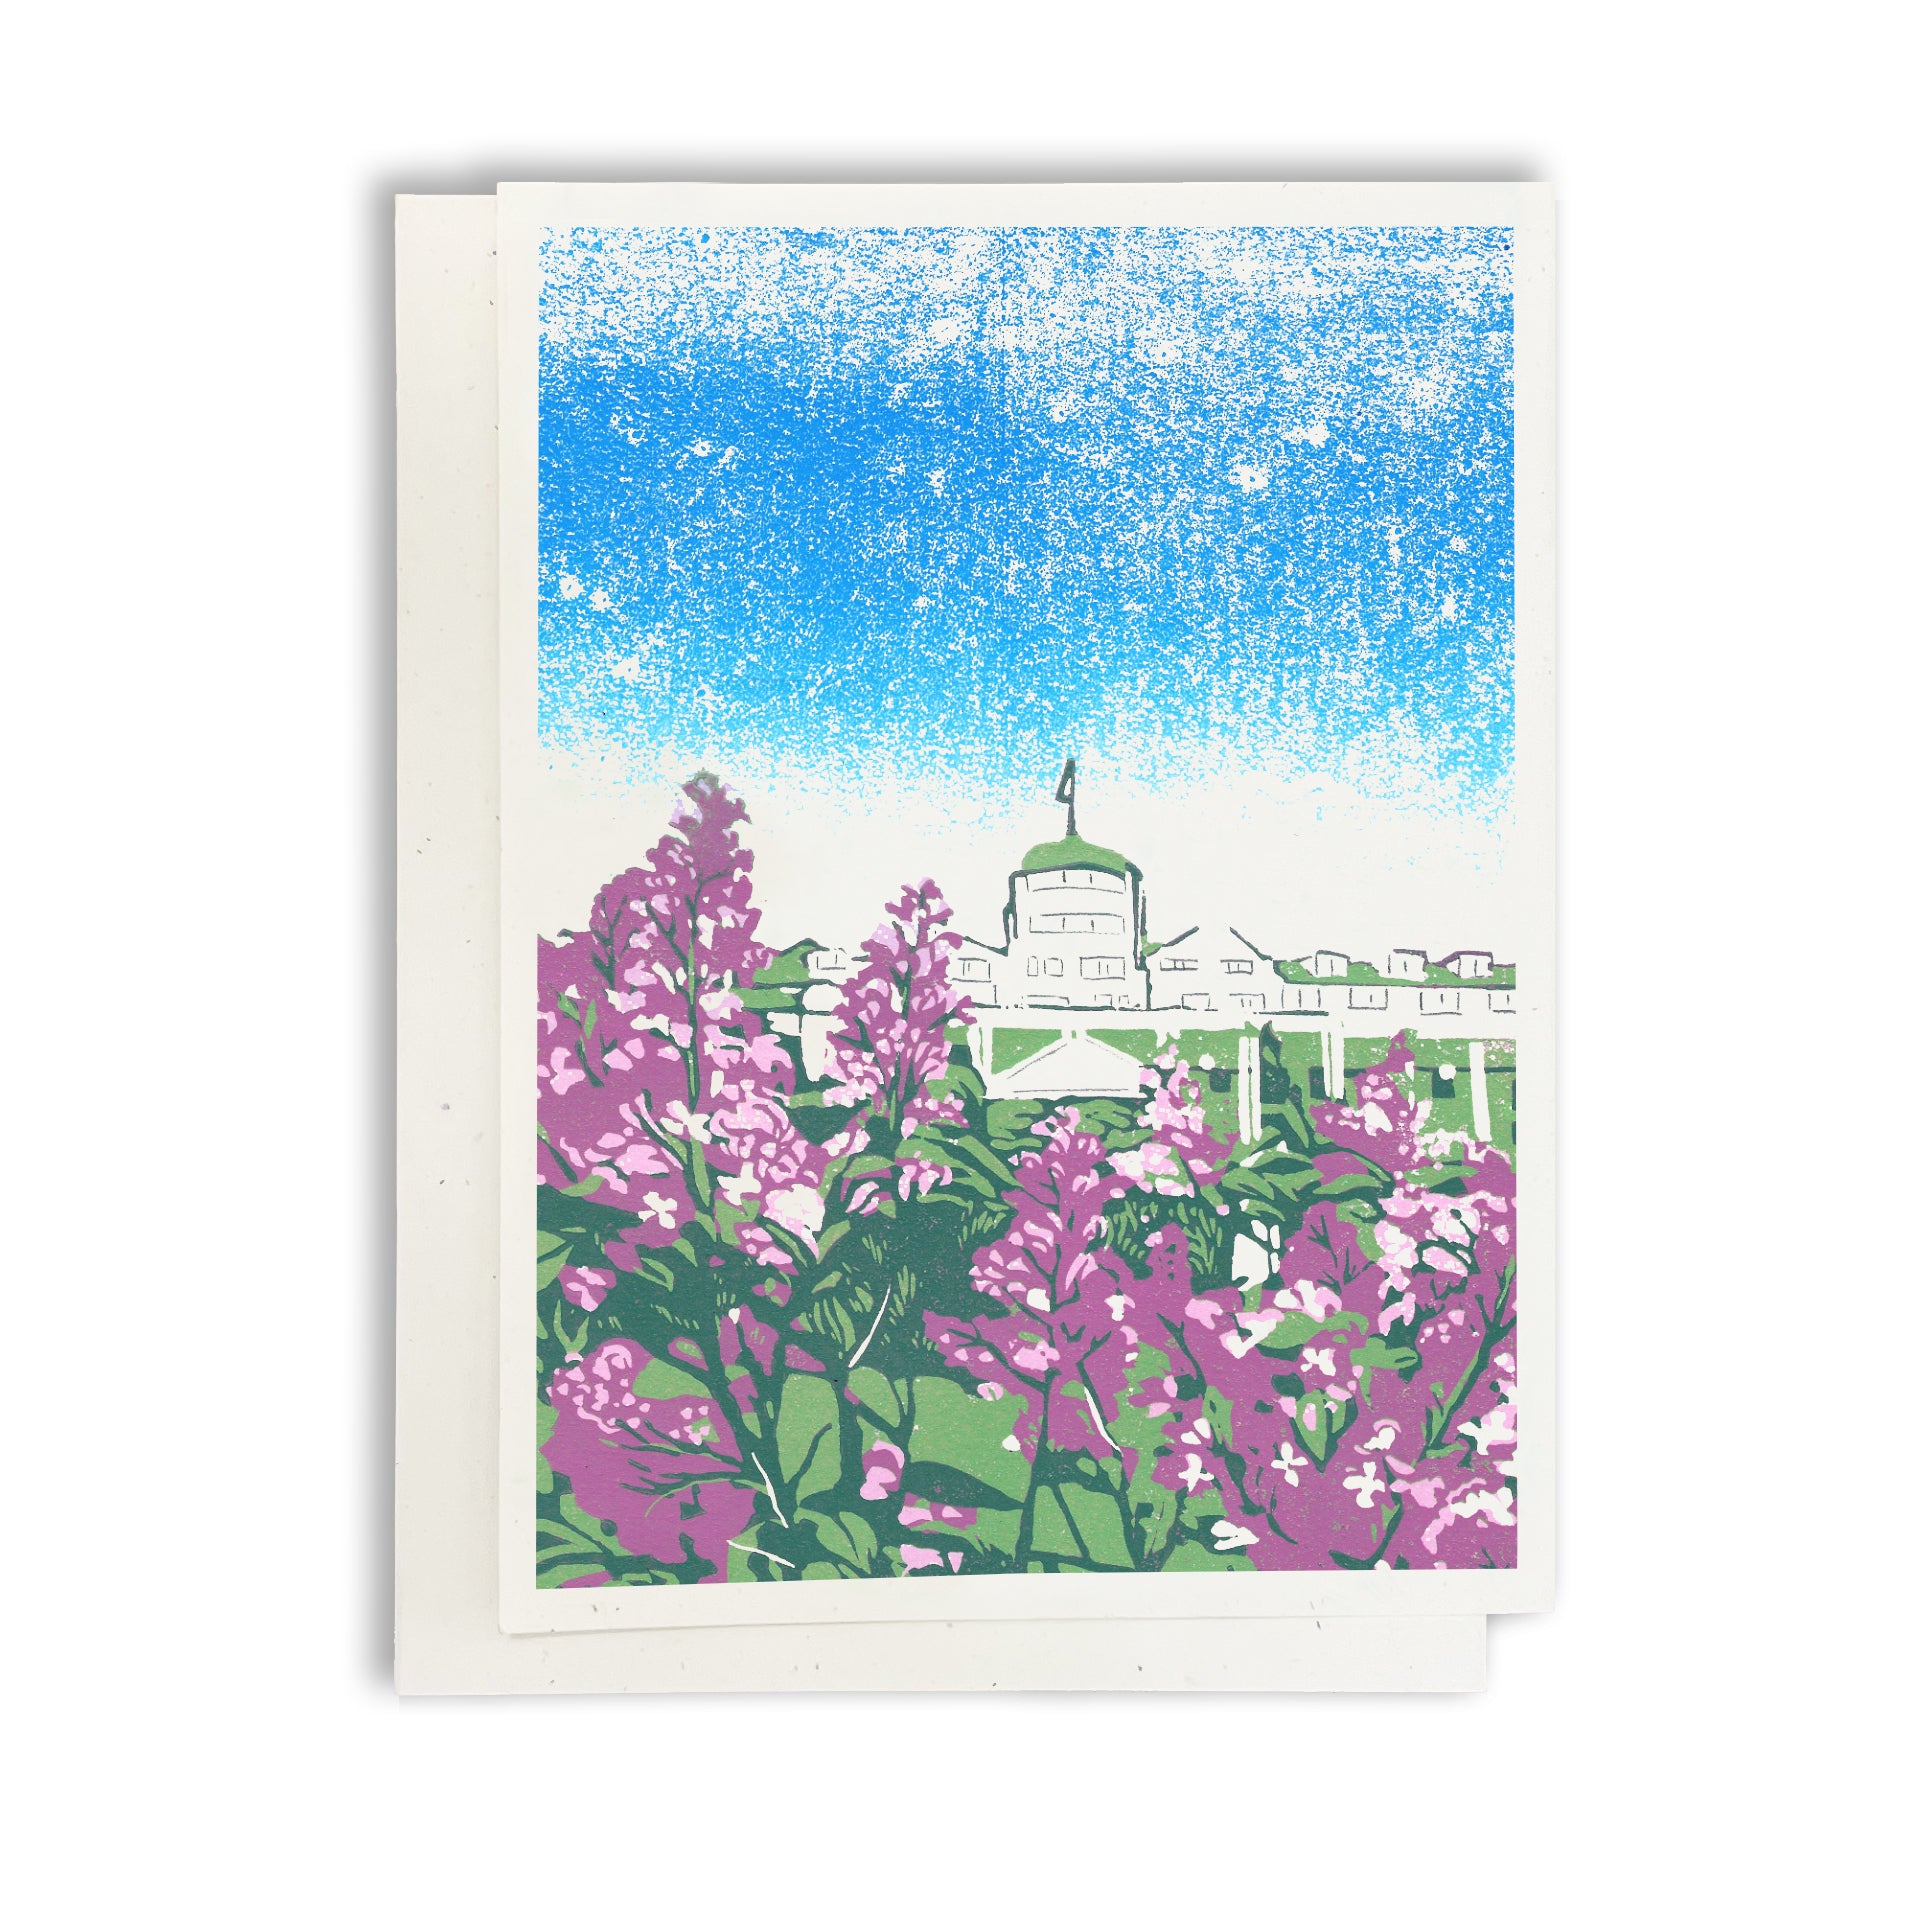 June at the Grand greeting card by Natalia Wohletz of Peninsula Prints.